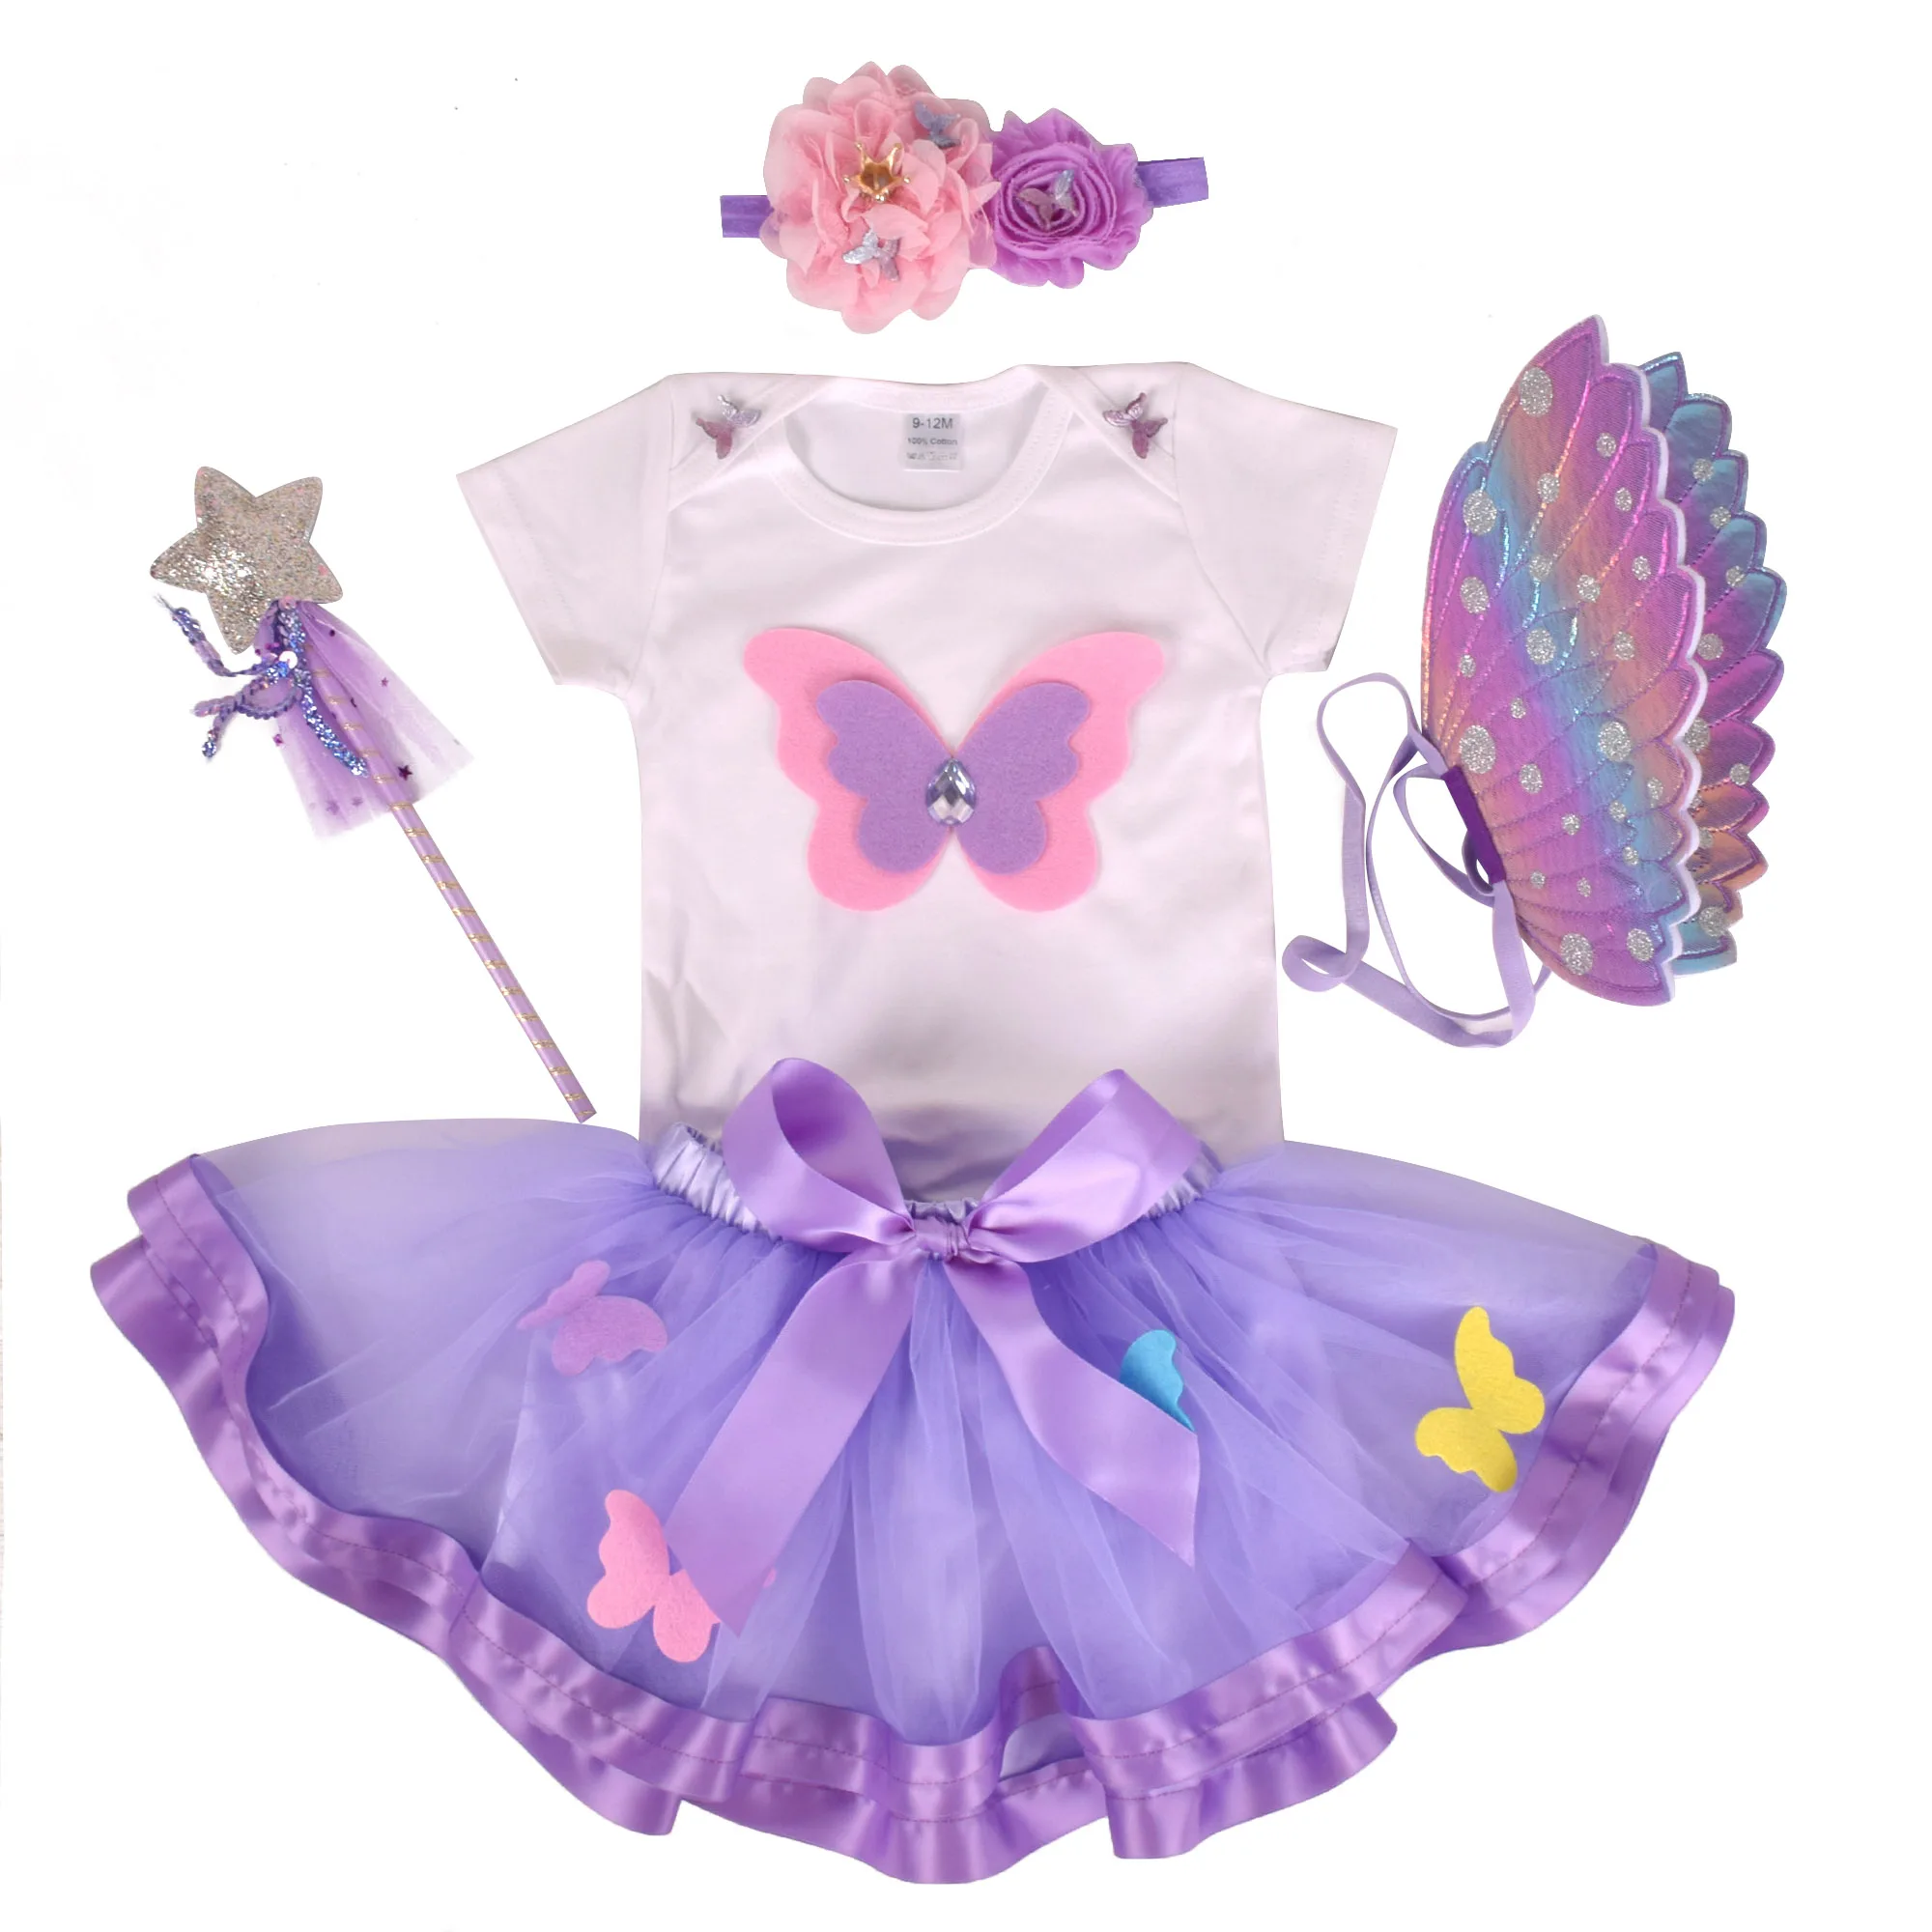 

Baby girl Butterfly Birthday Tutu outfit Girls 1st Birthday Party costume Toddler Photo Props Cake Smash Kids Cosplay Tutu